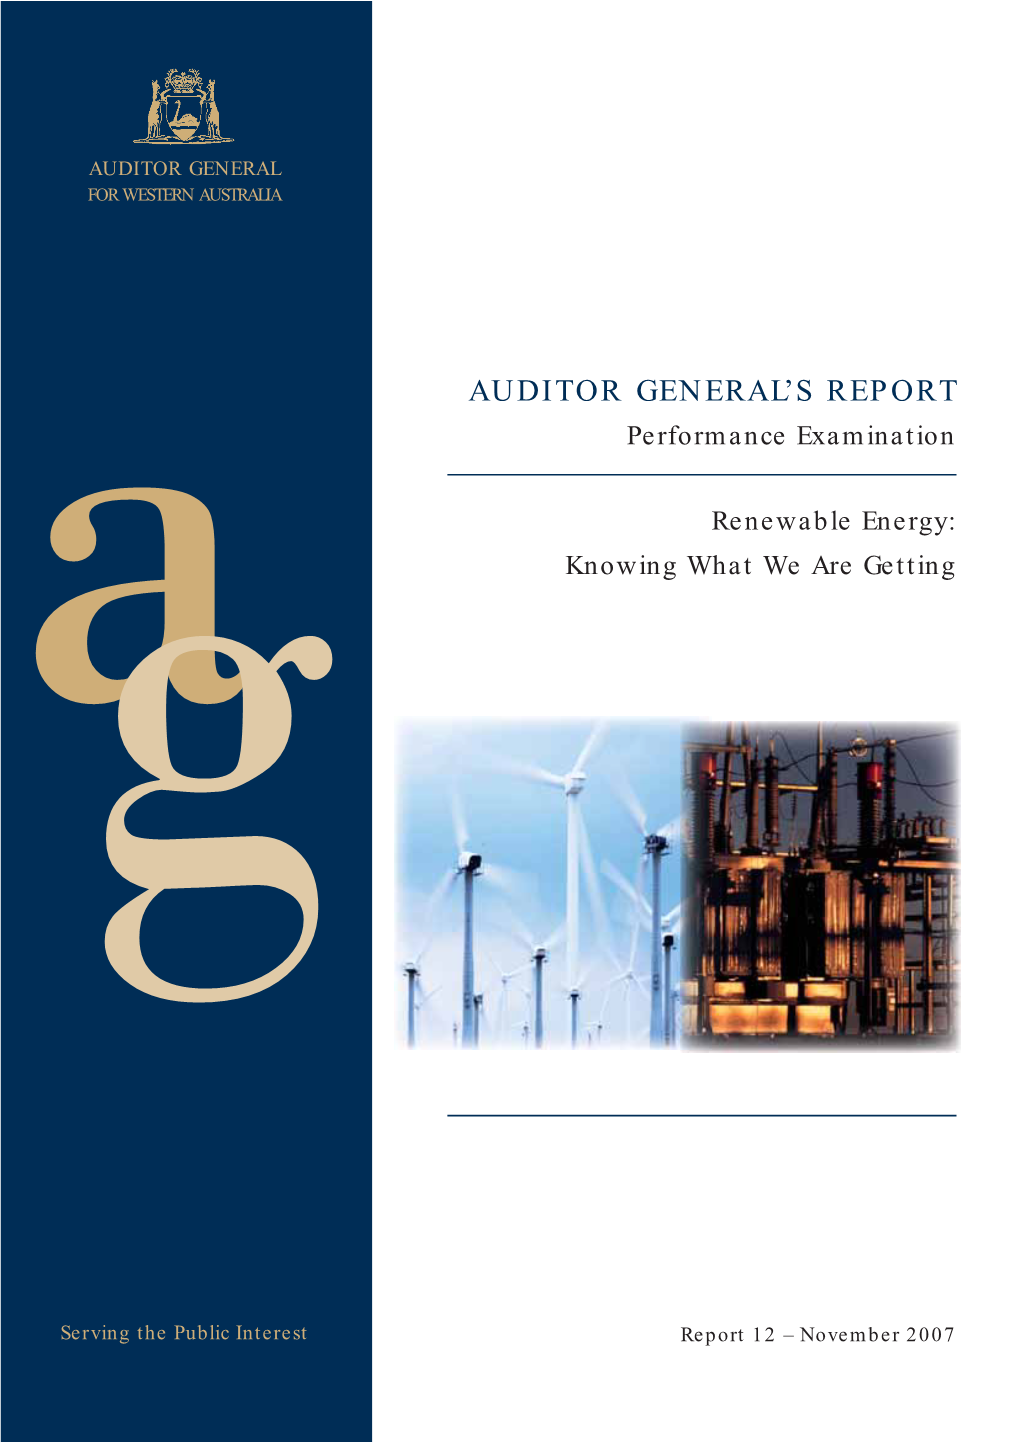 AUDITOR GENERAL's REPORT Performance Examination